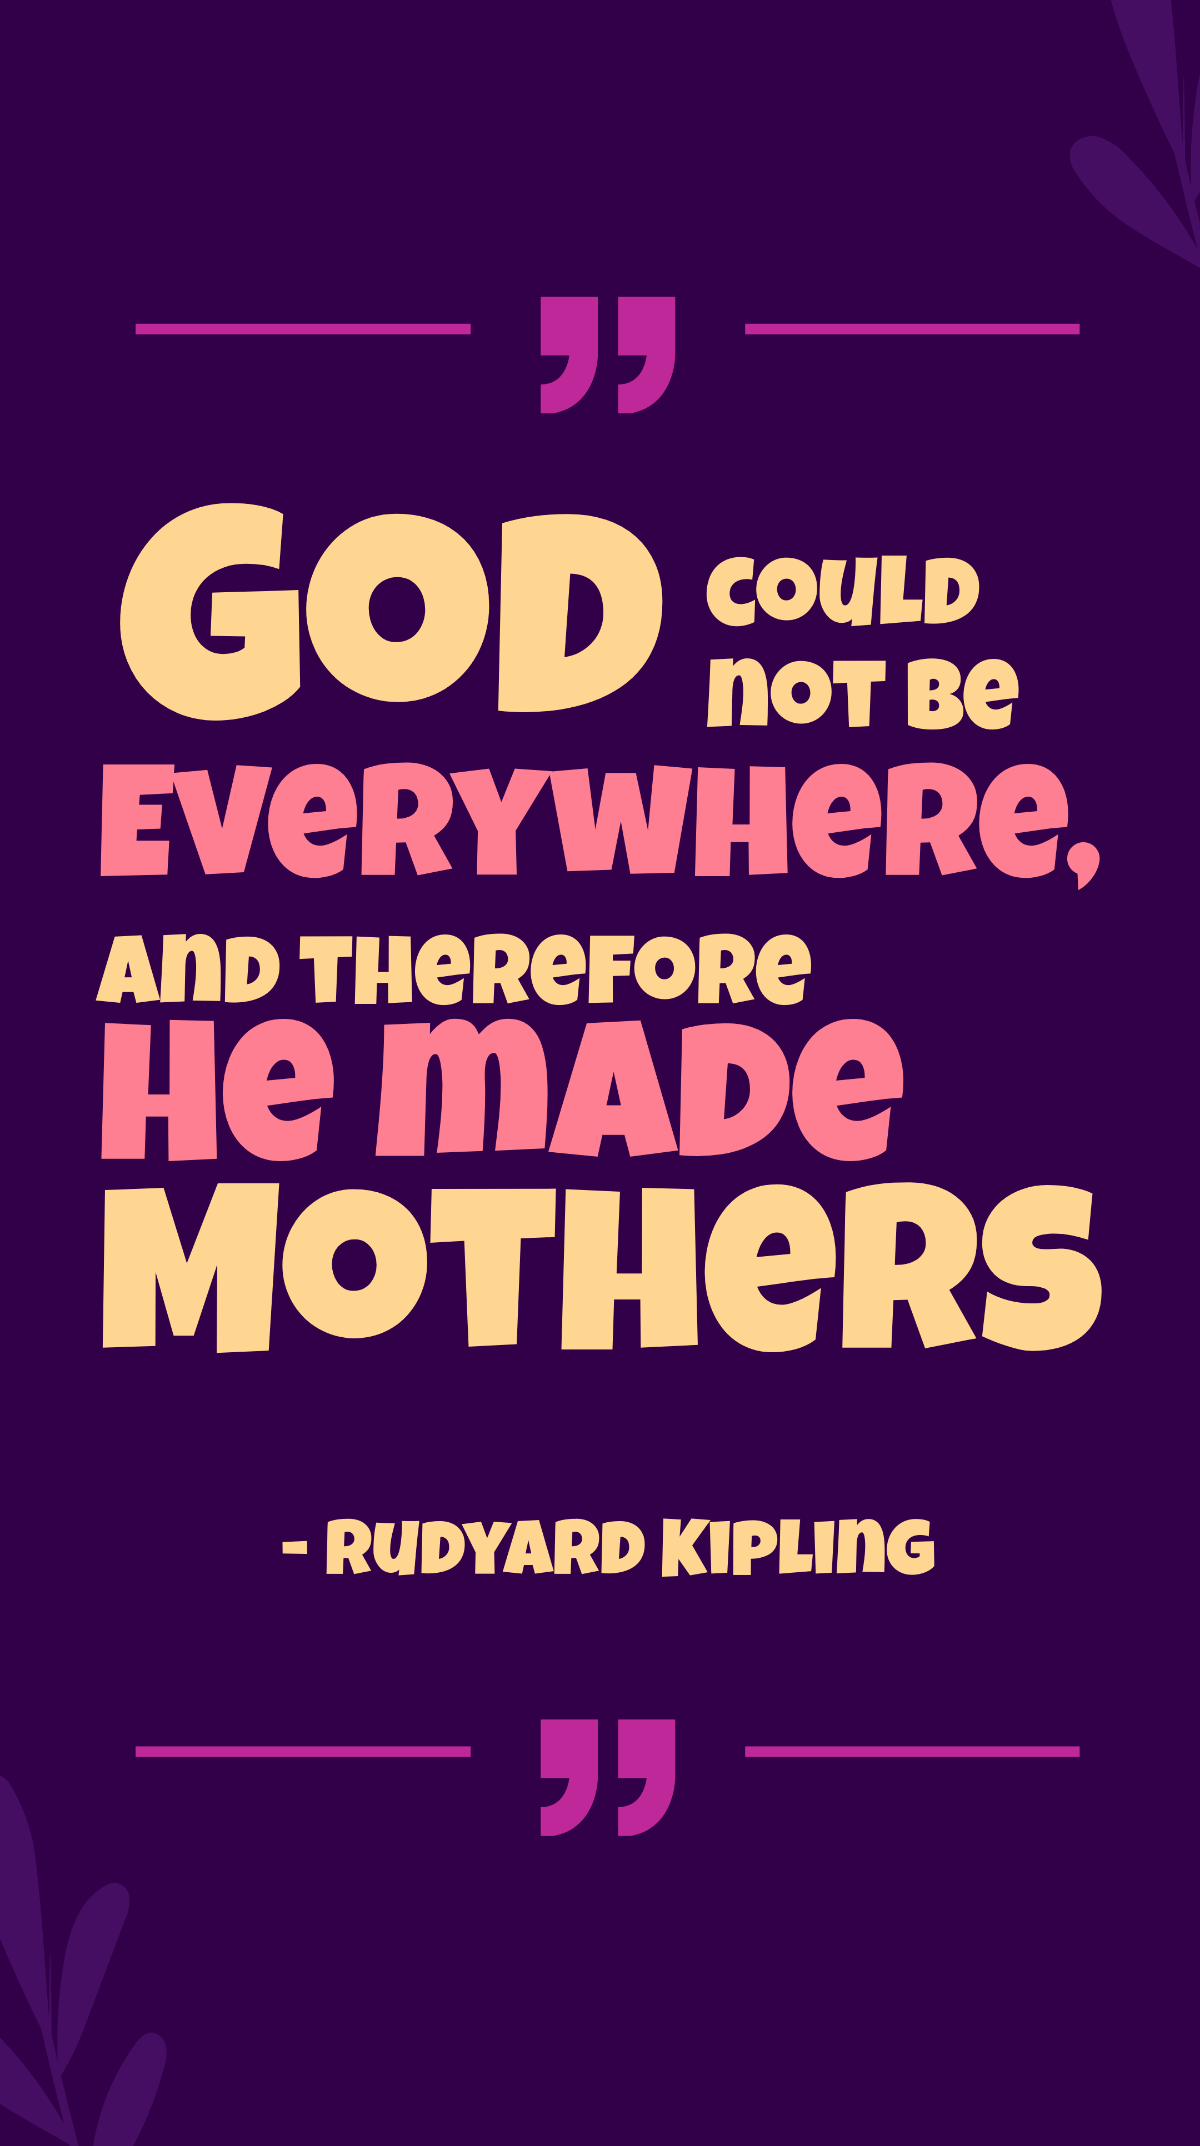 Rudyard Kipling - God could not be everywhere, and therefore he made mothers.  Template